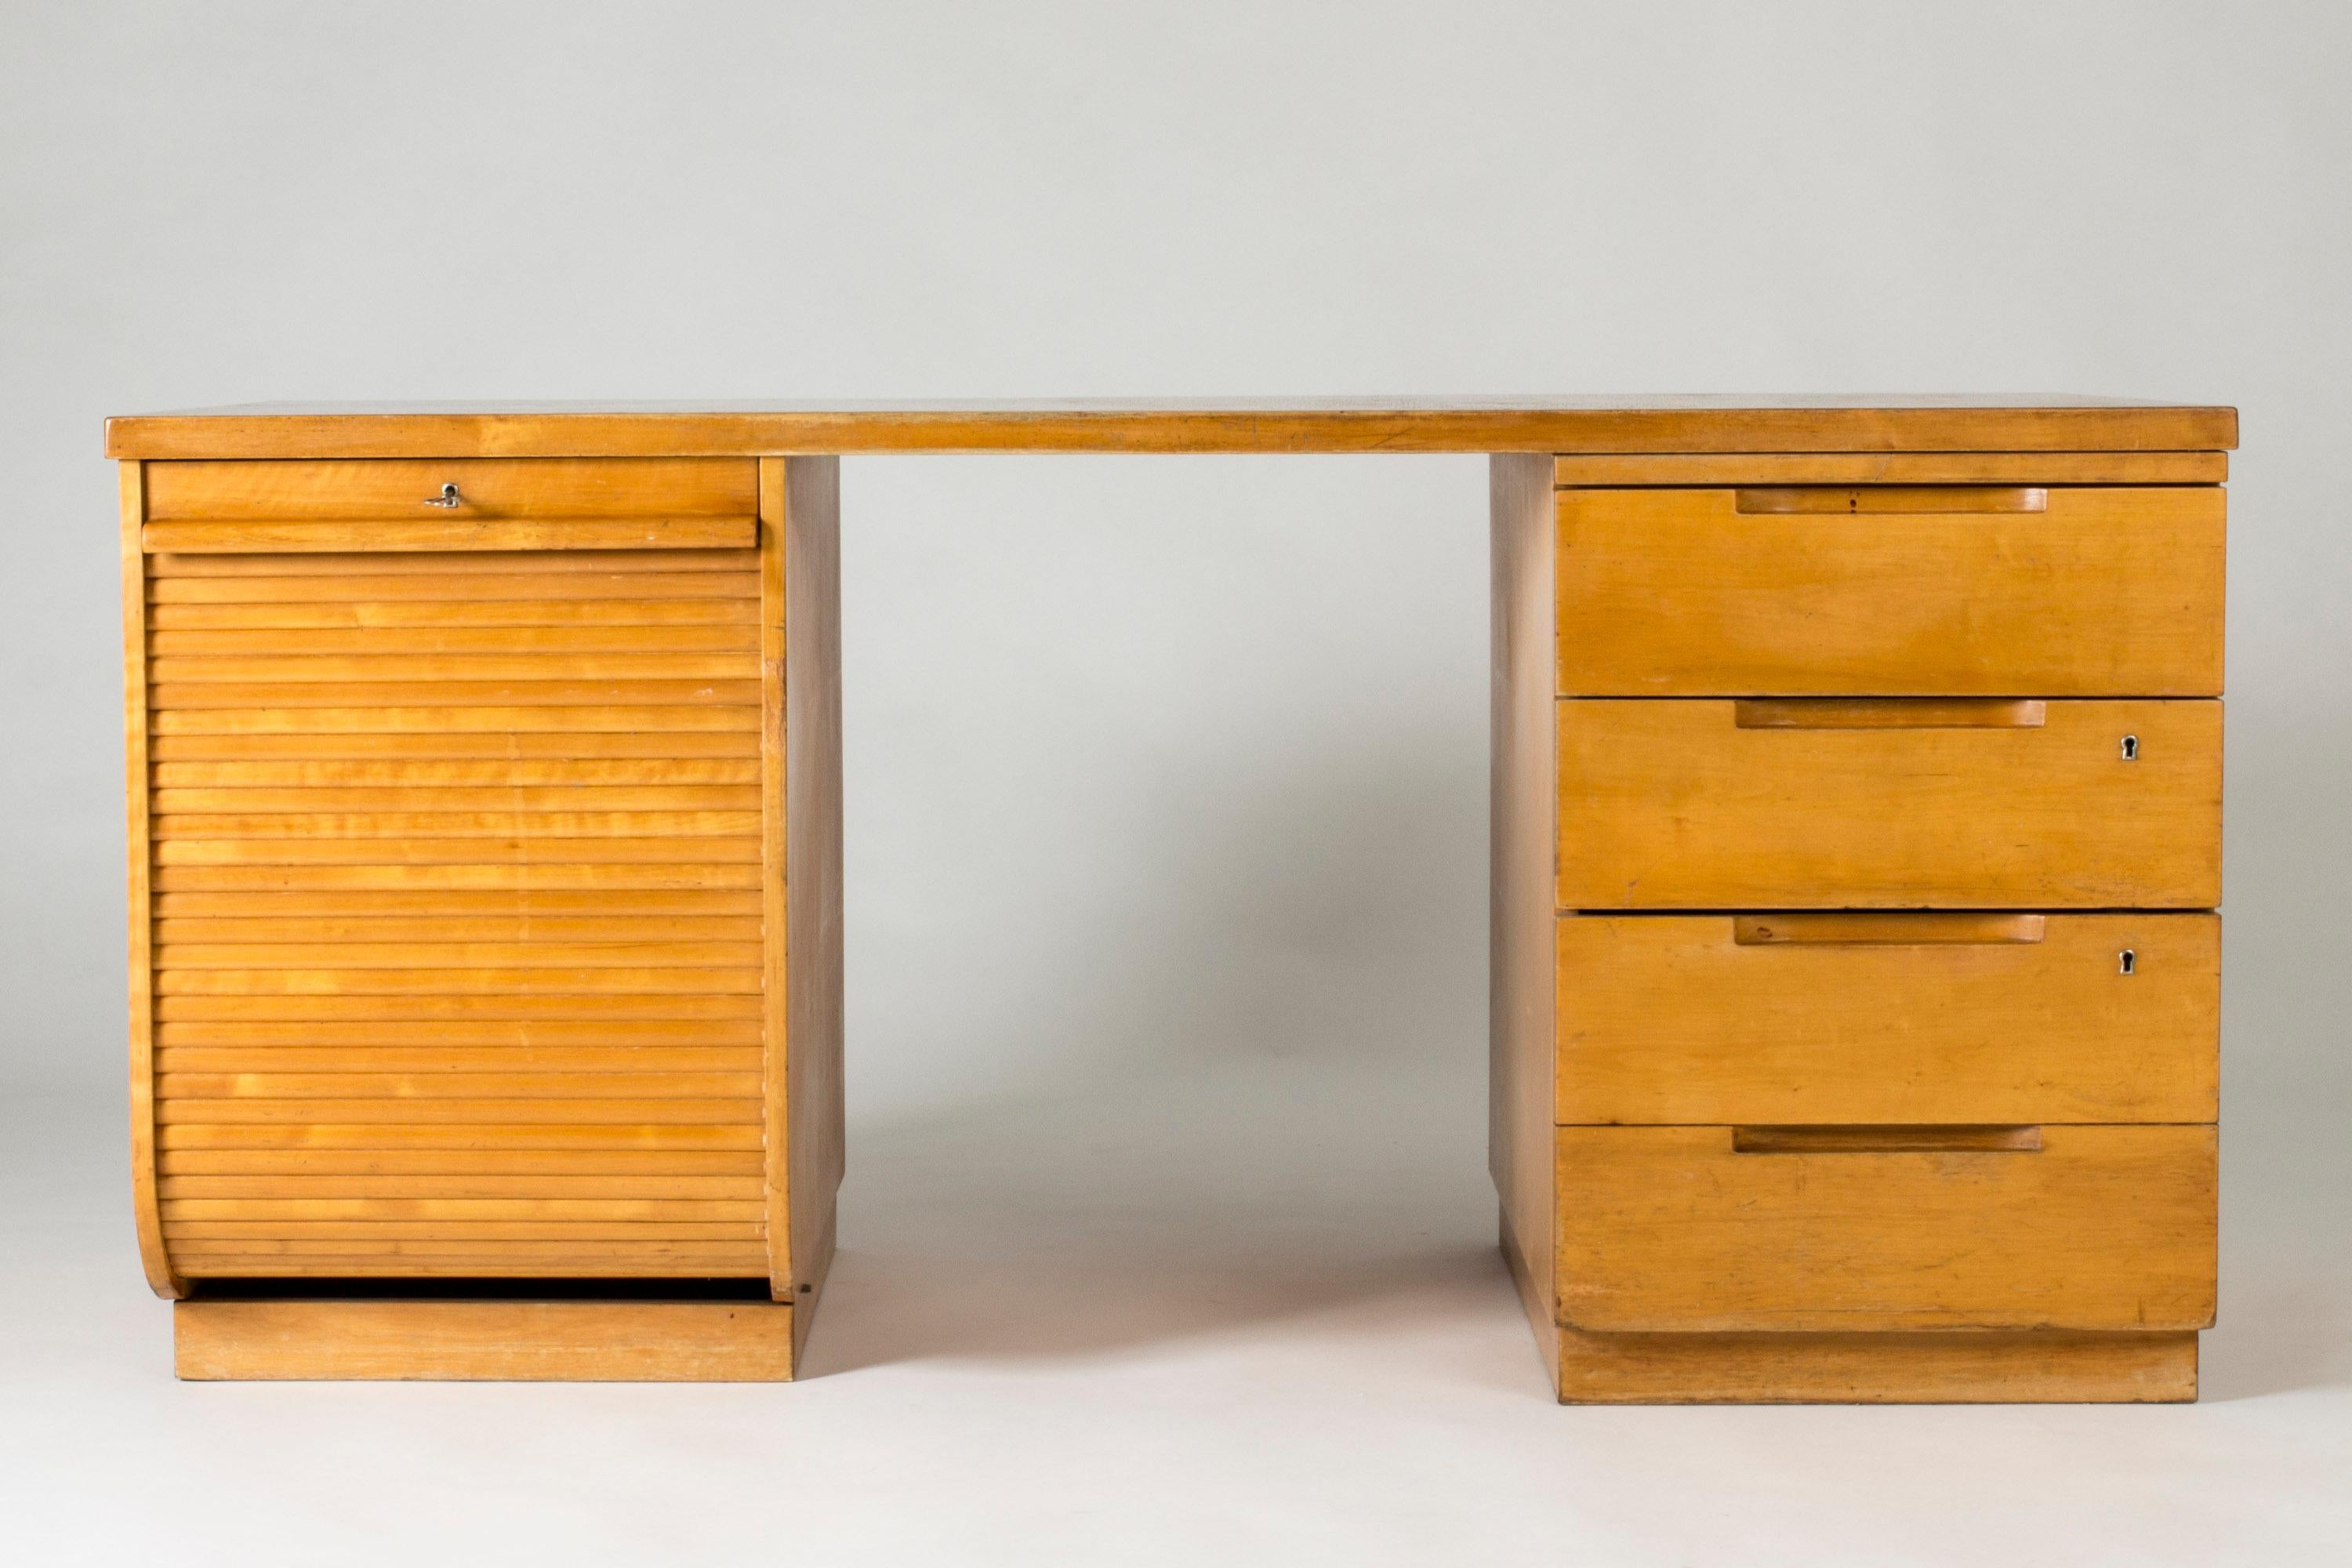 Striking desk by Alvar Aalto, made from birch in a compact functionalist design. Drawers to the right and a filing cabinet to the left with a jalousie door.

Ink spots inside the top drawer.